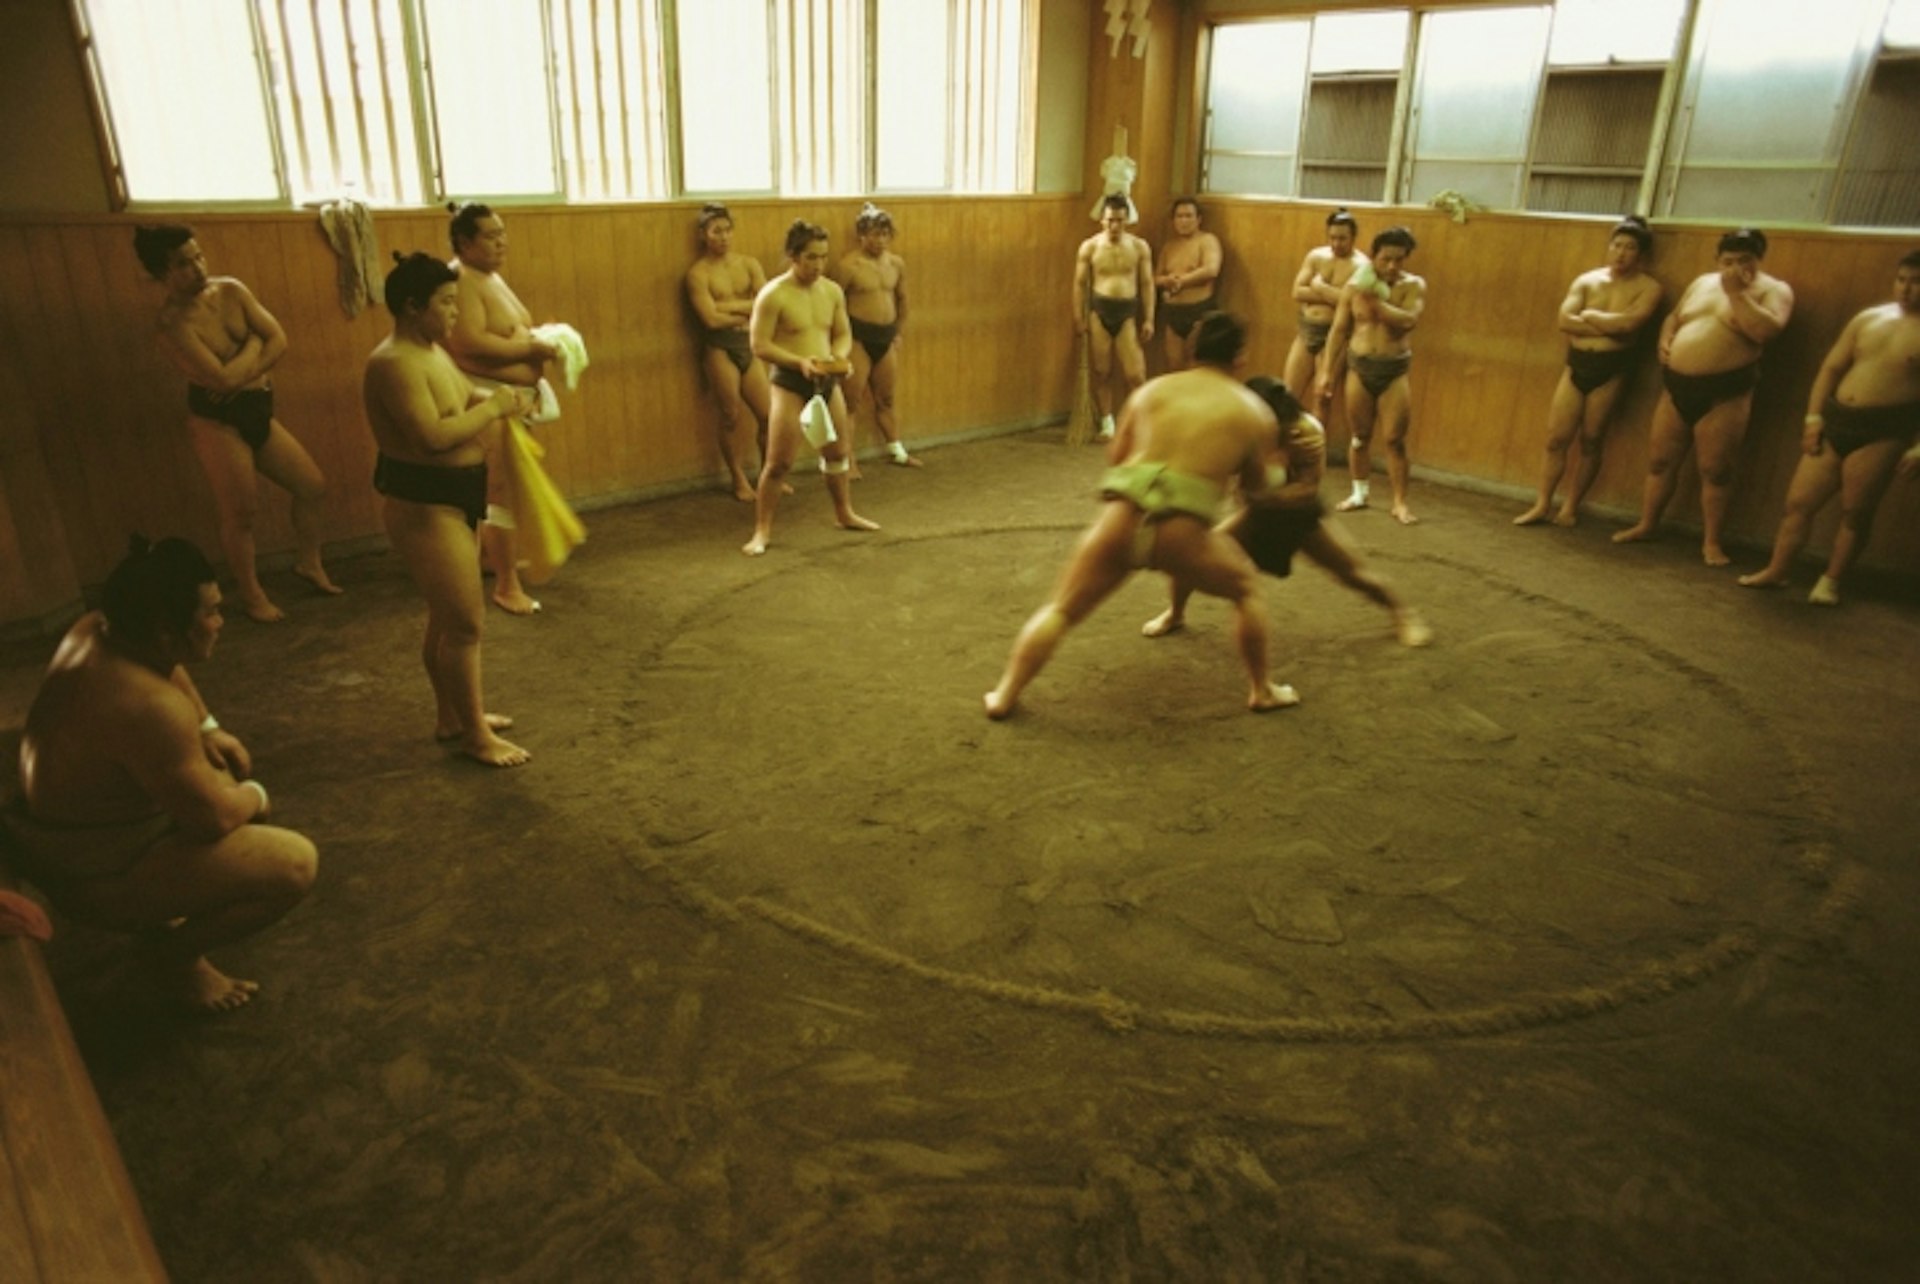 Sumo wrestlers training in Tokyo Prefecture. Photo by Glowimages / Getty Images